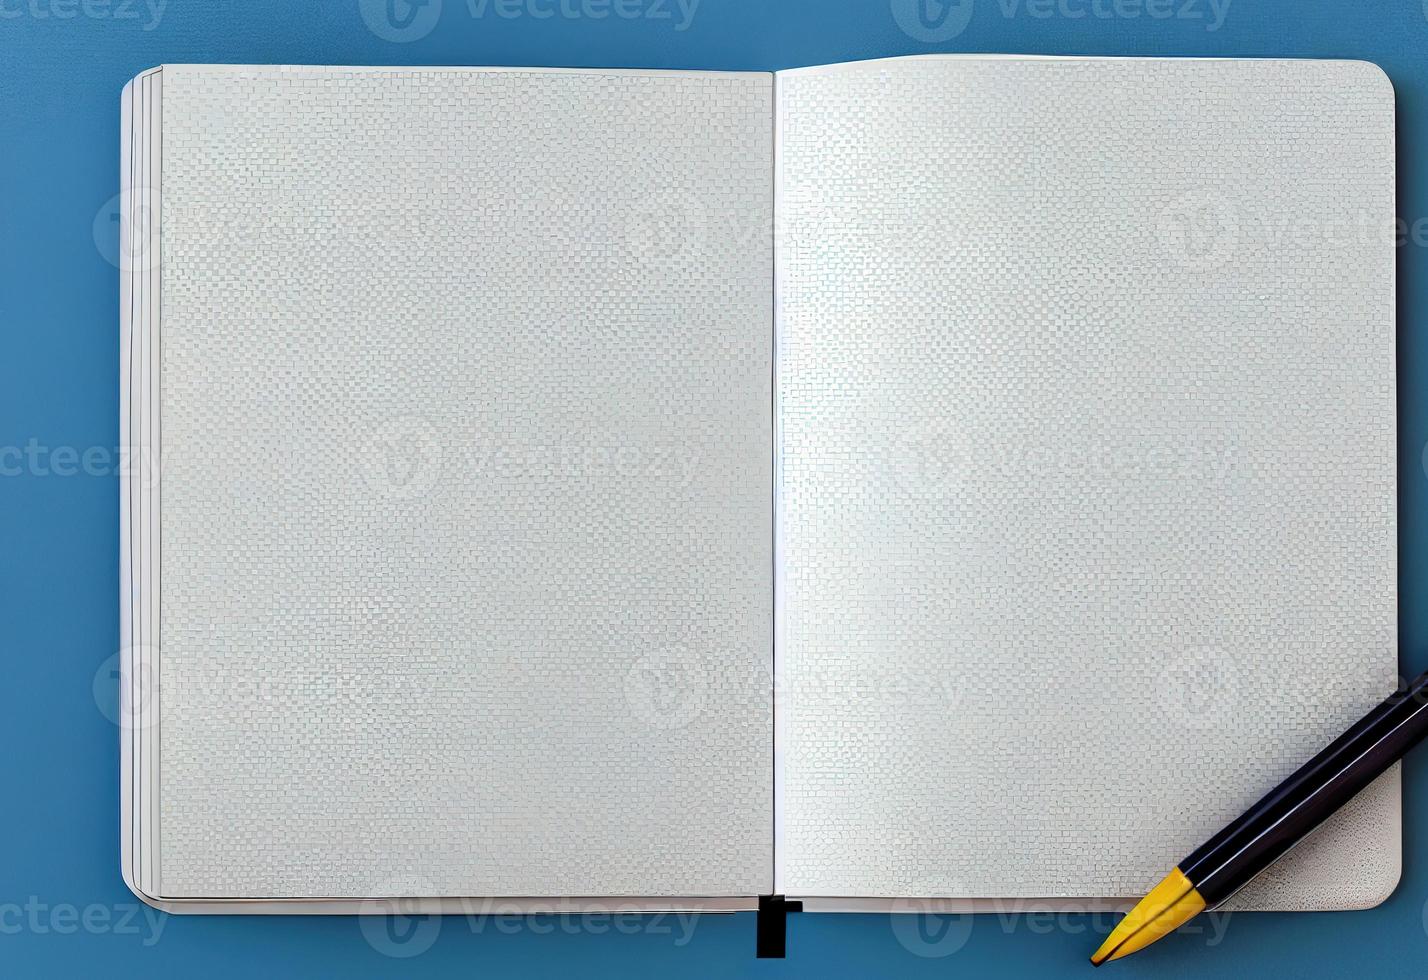 Top view photo of open copybook.